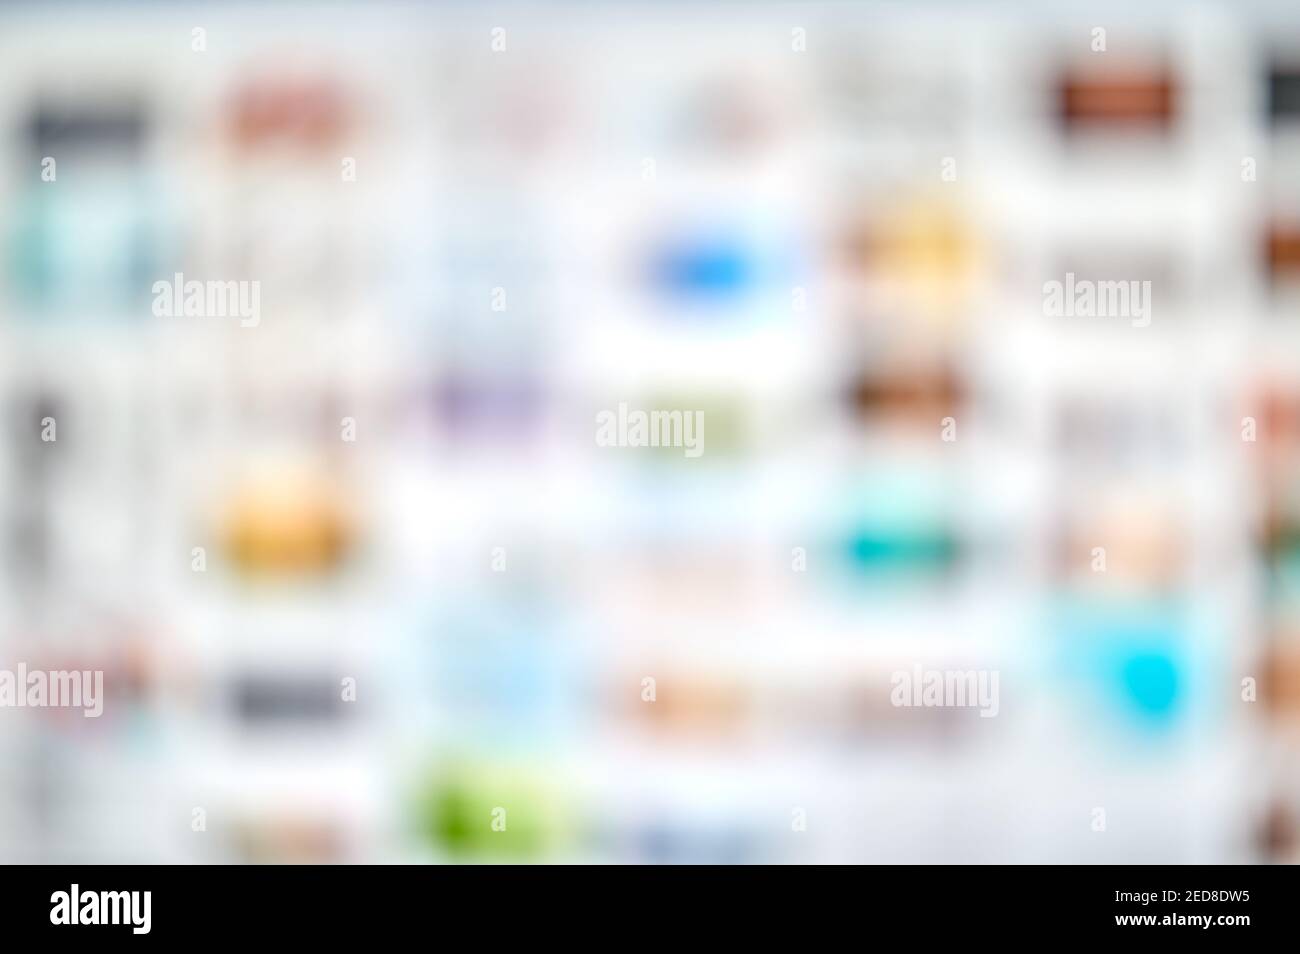 detail of a blurred view of a file viewer with thumbnail images Stock Photo